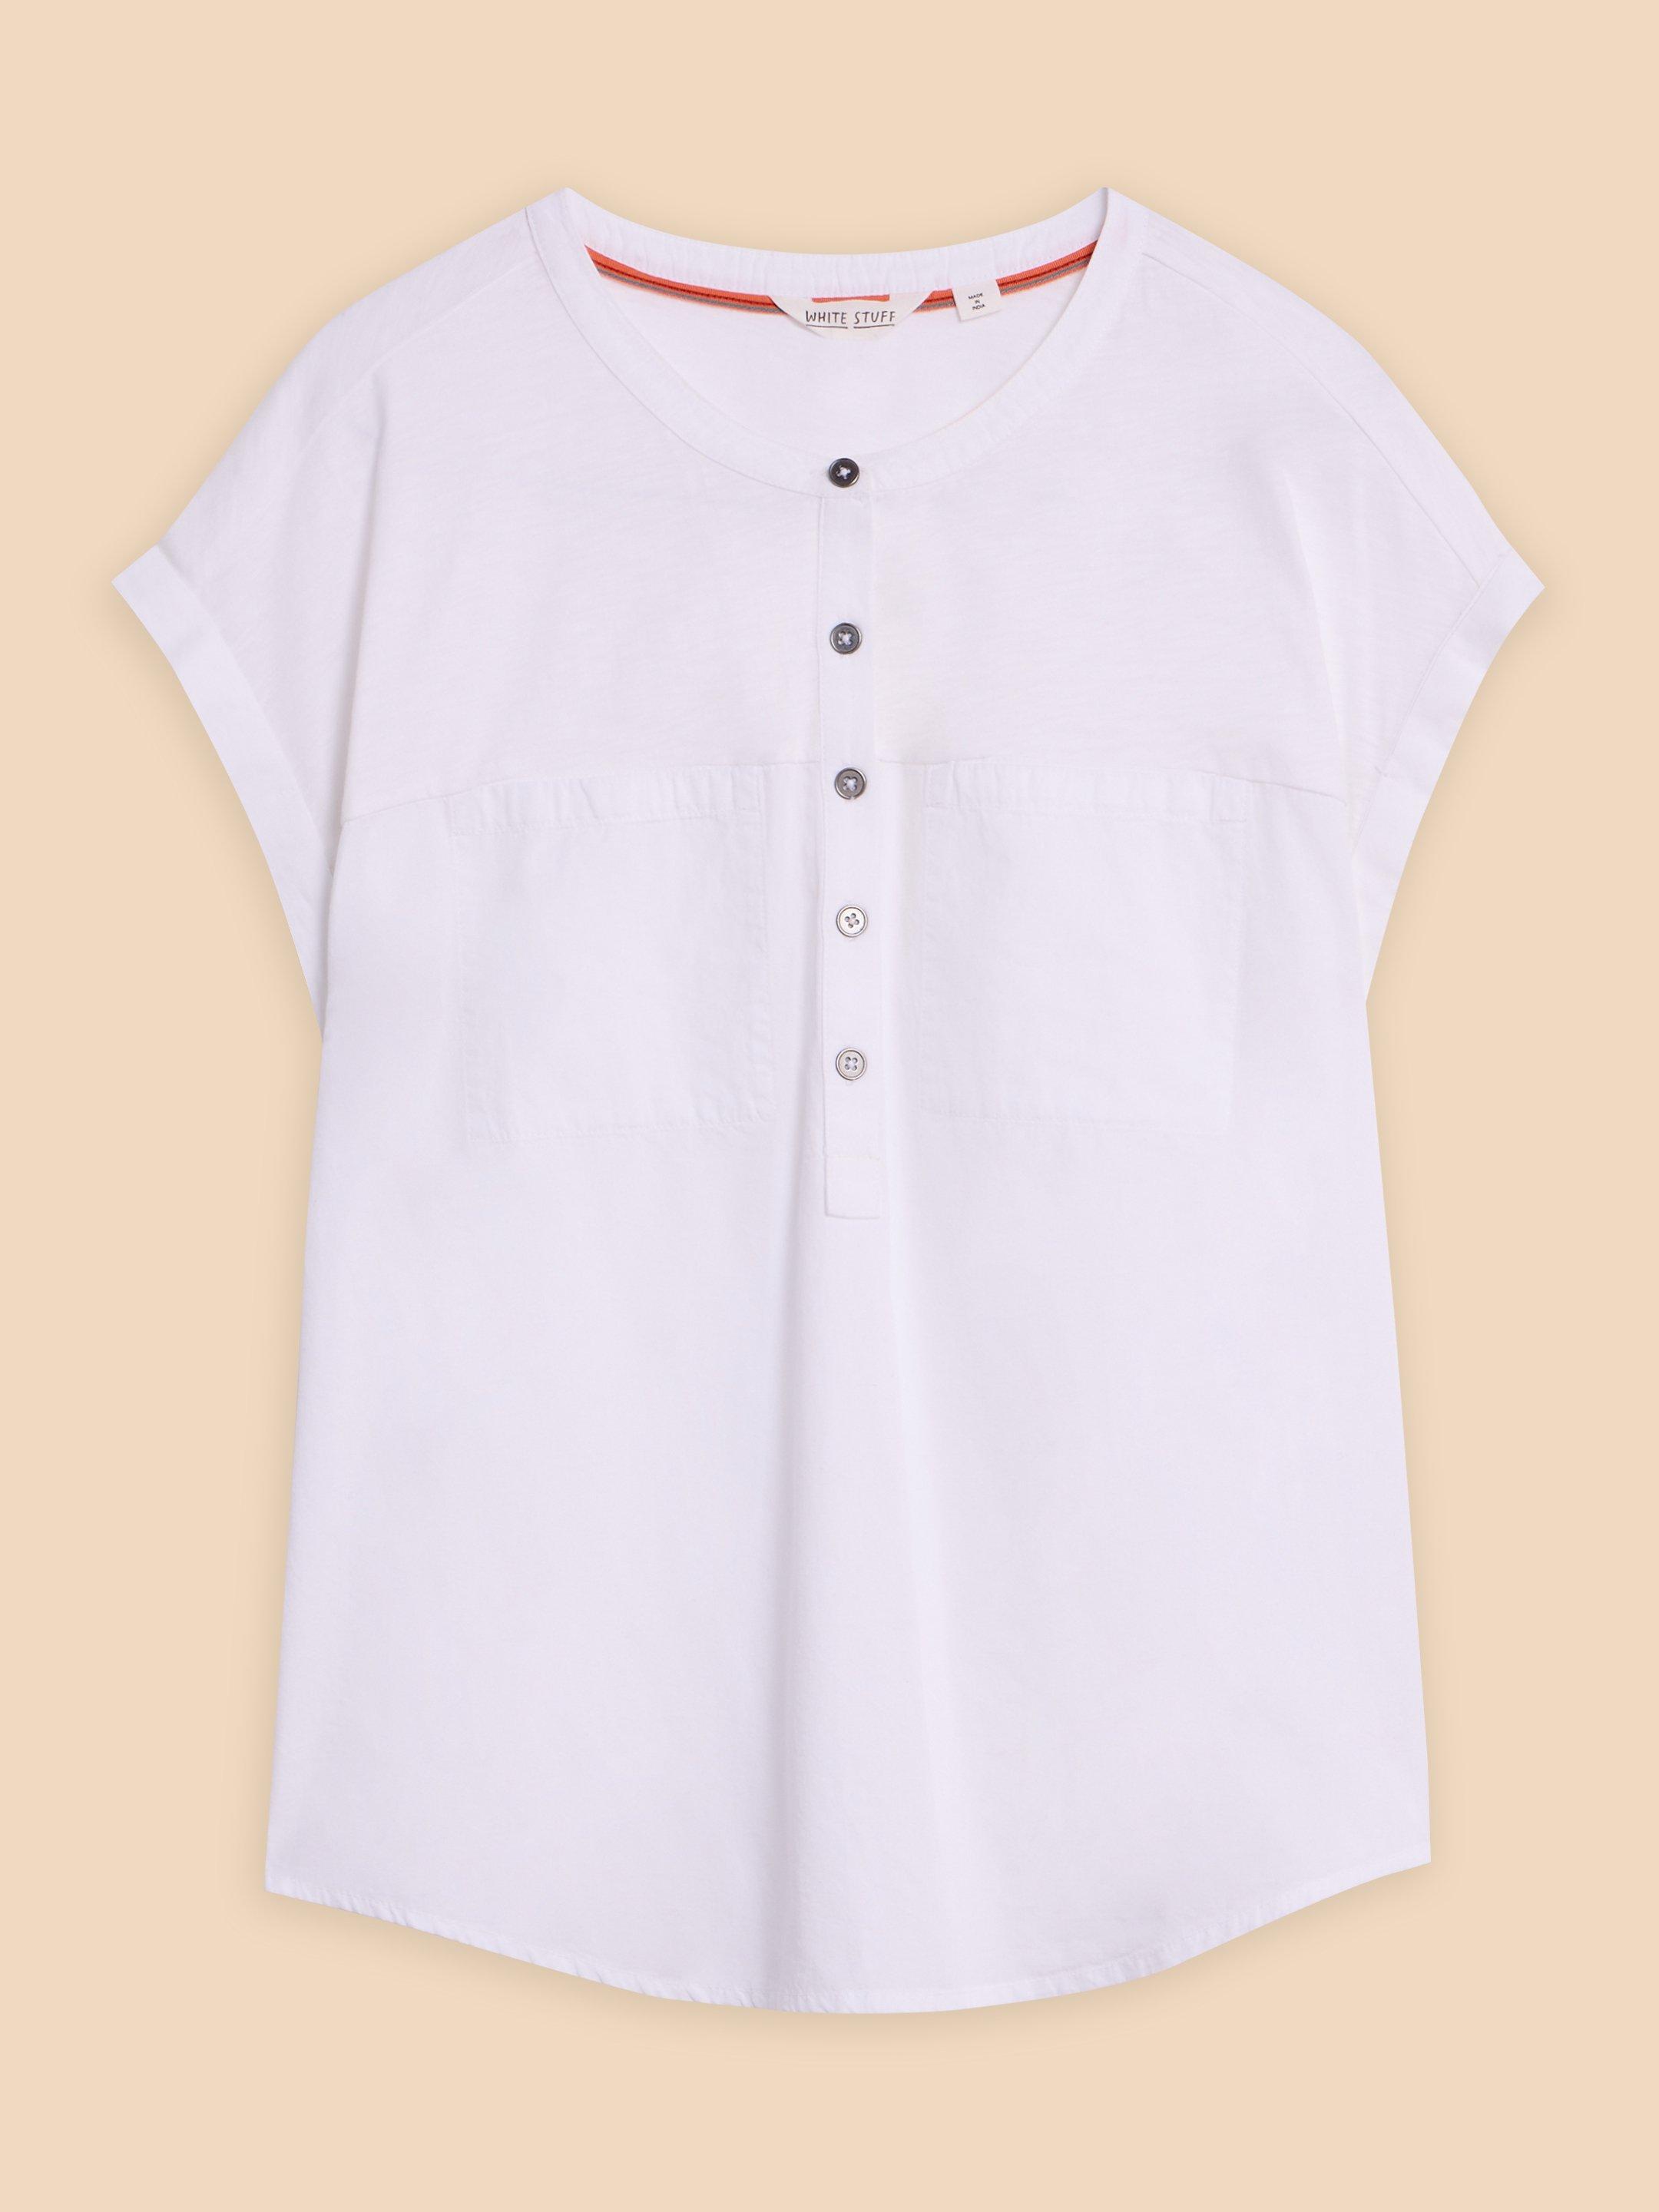 BETH JERSEY SHIRT in BRIL WHITE - FLAT FRONT